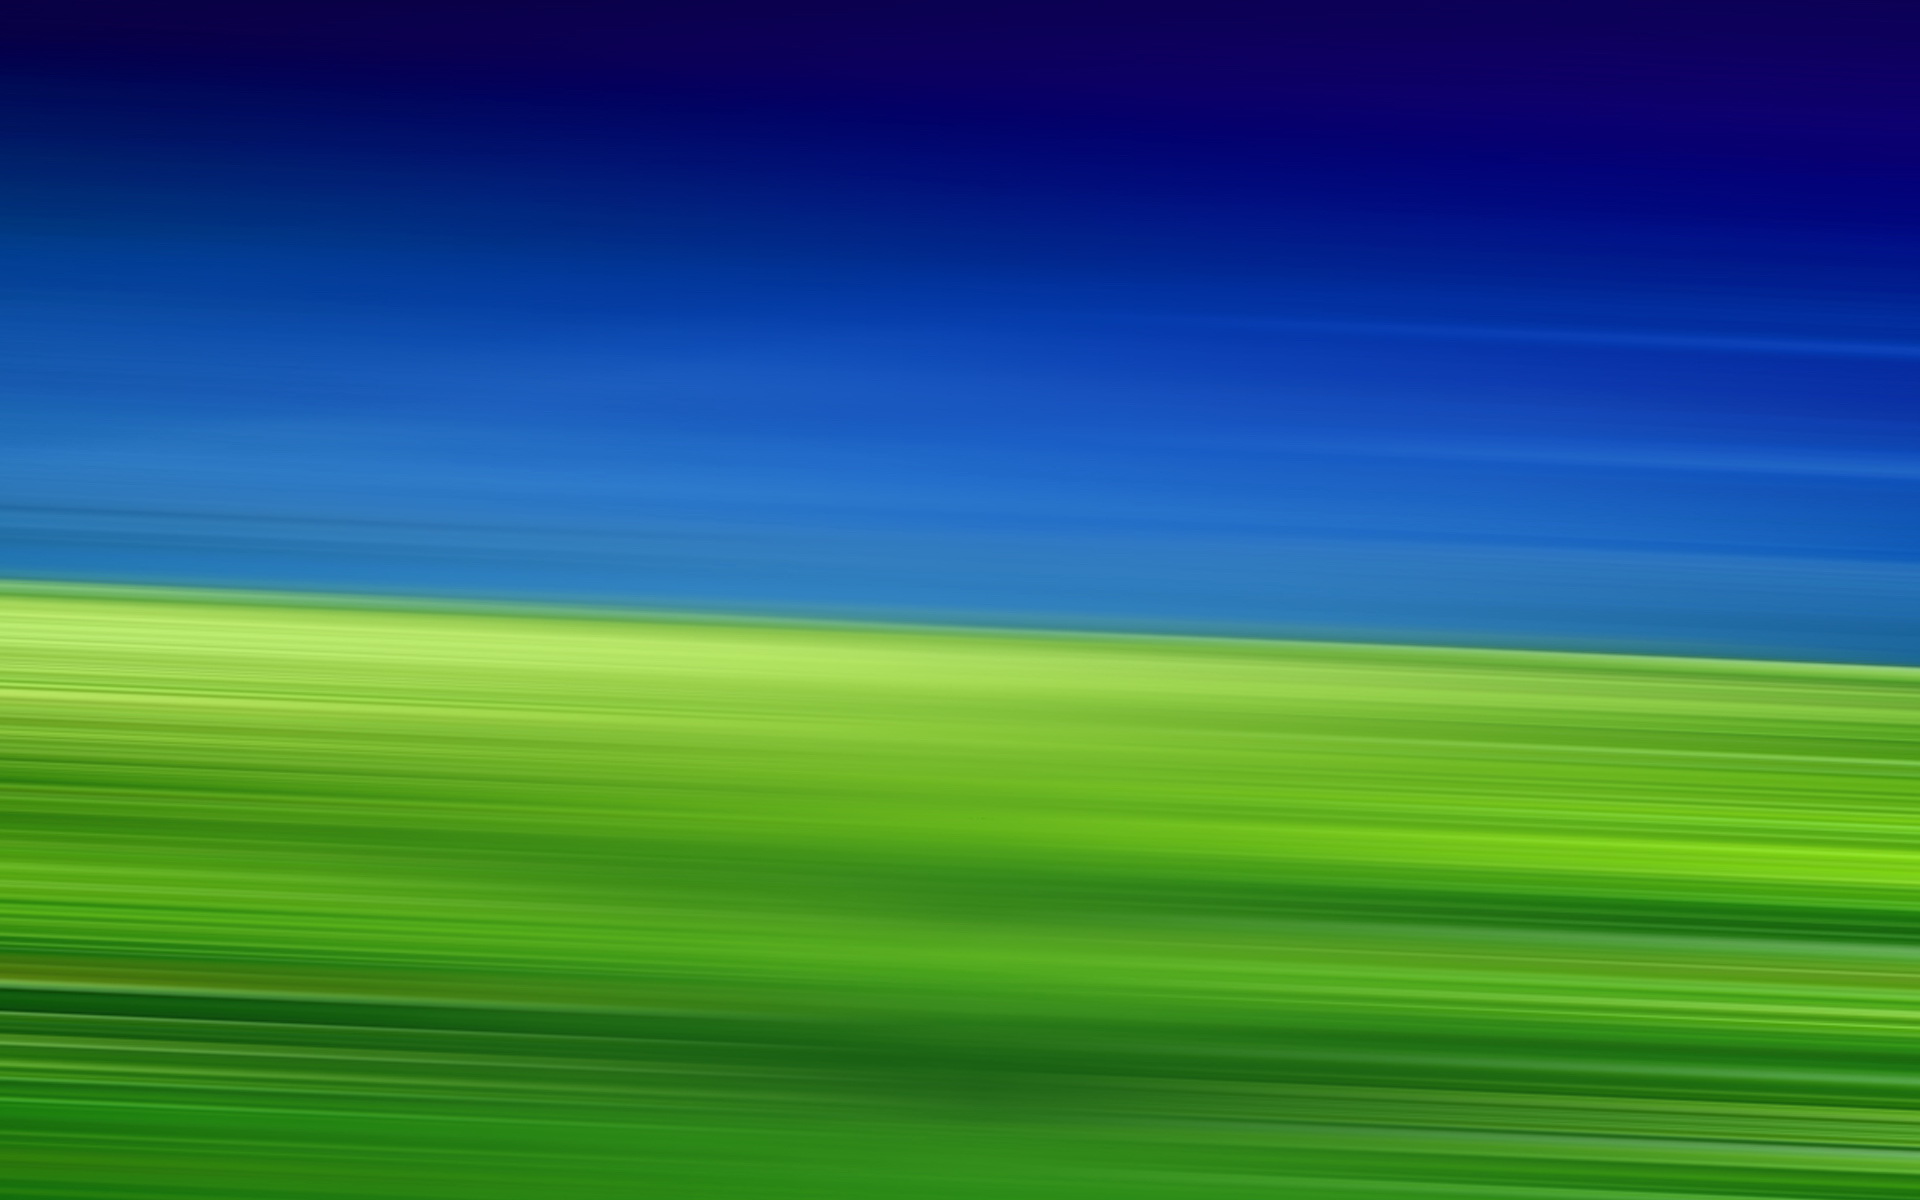 green blue abstract wallpapers hd wallpapers id 27985 on blue green wallpapers